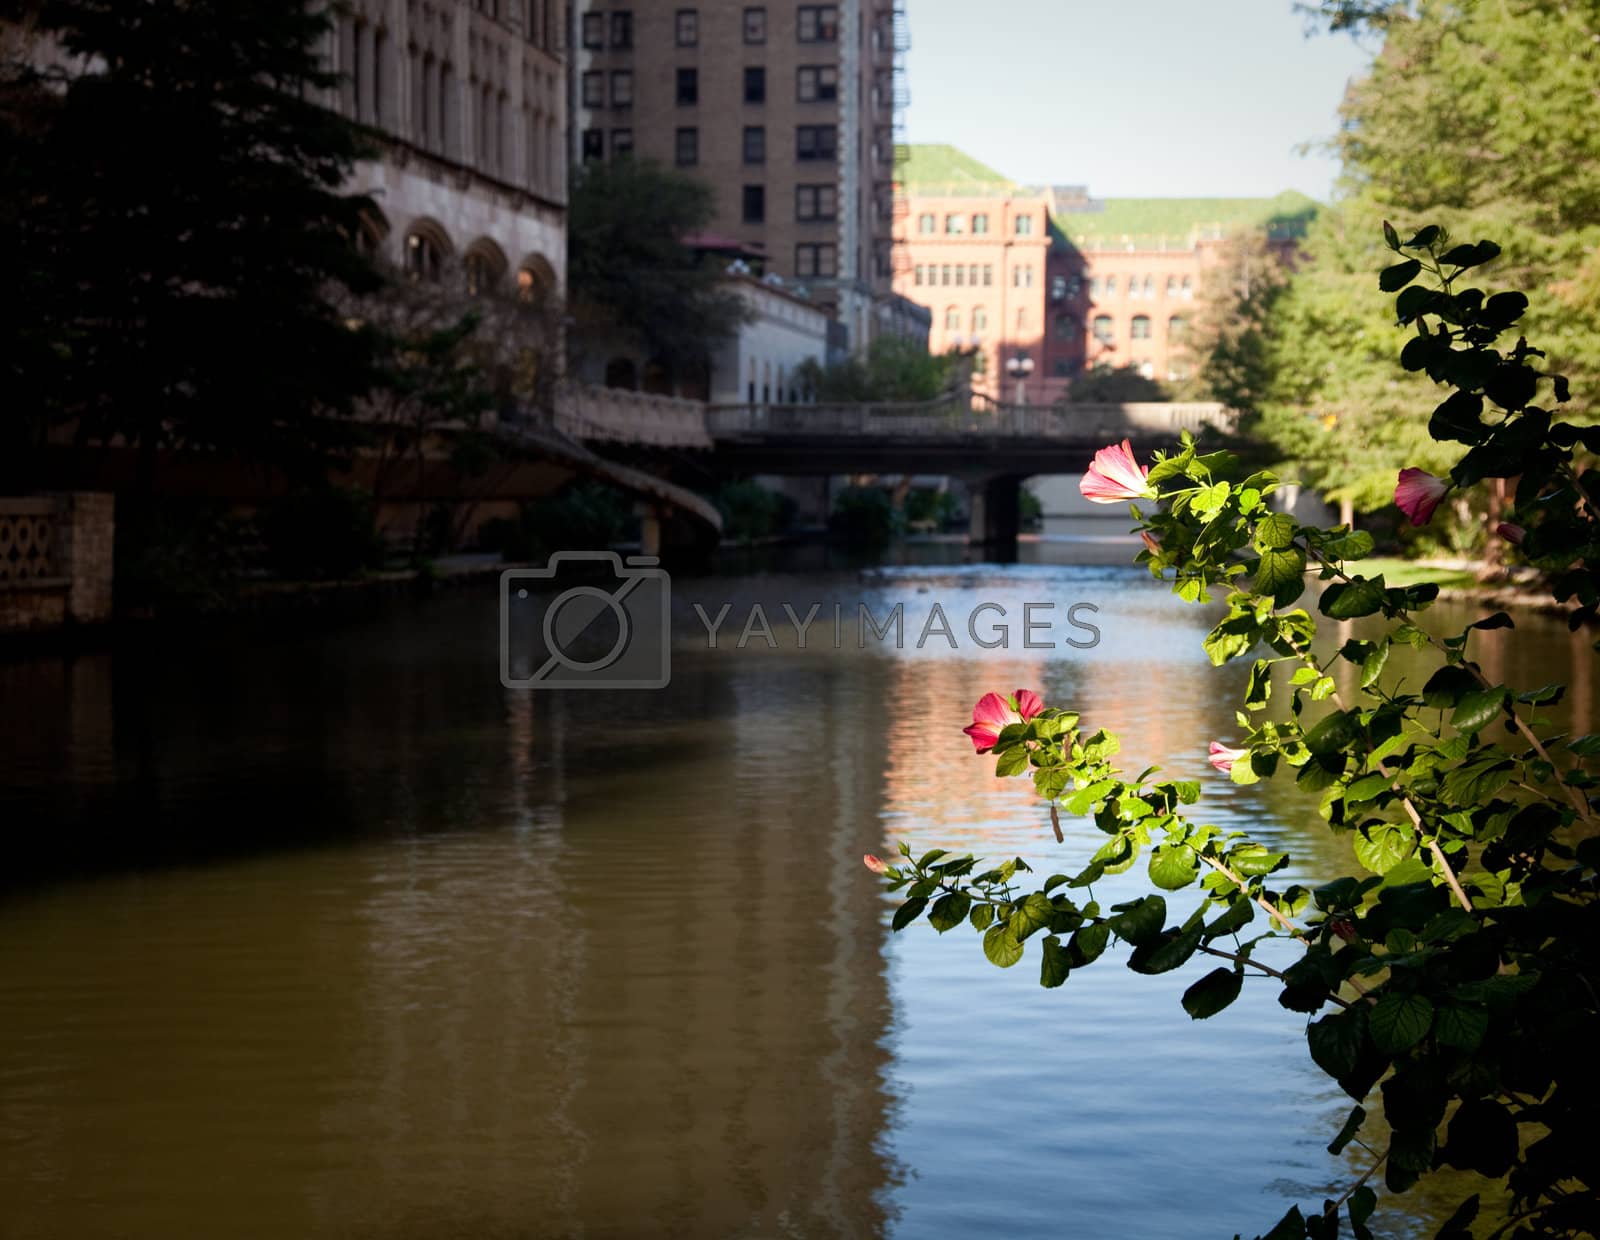 Royalty free image of River in San Antonio with old buildings by steheap